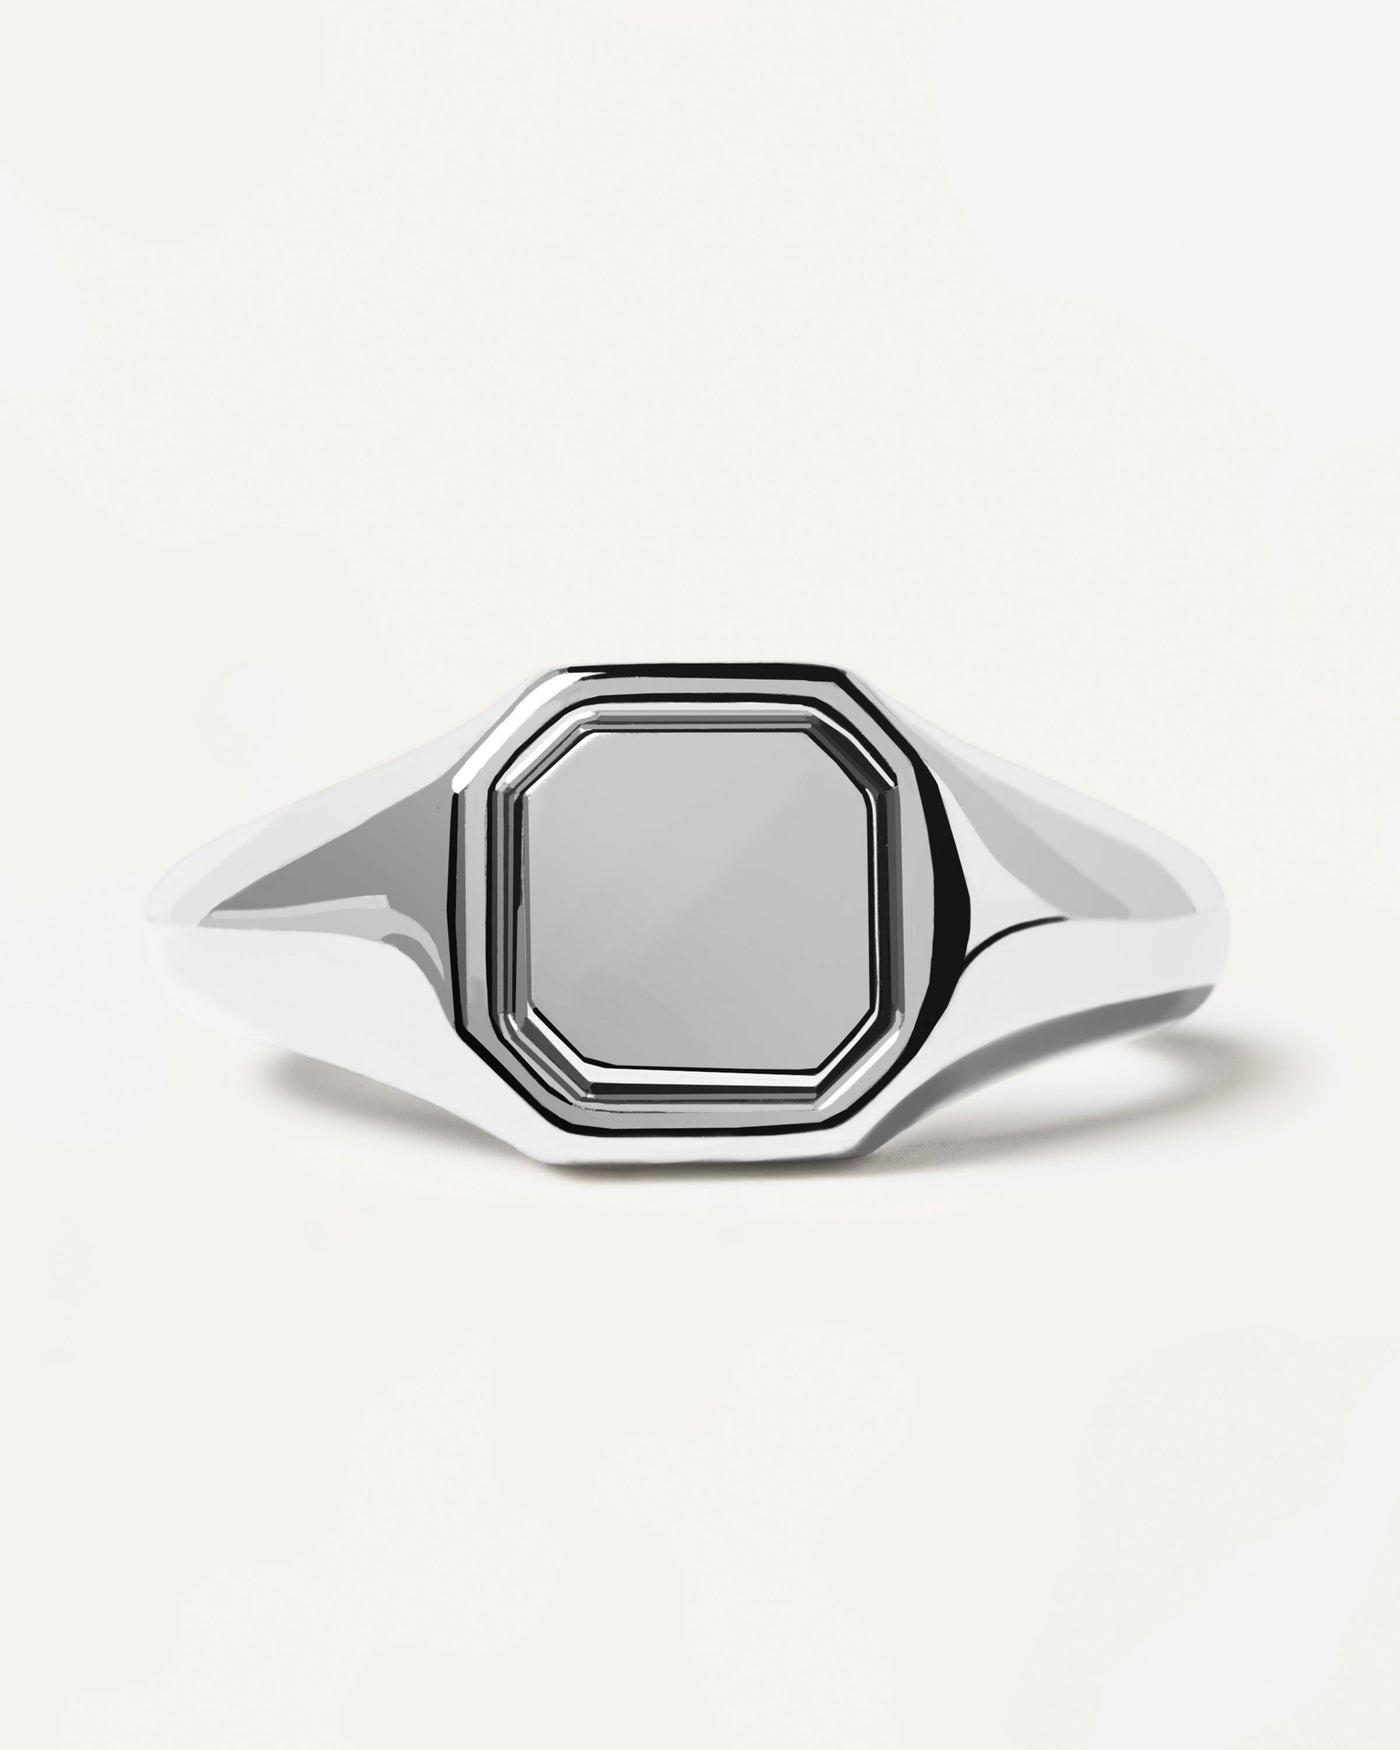 2023 Selection | Octet Stamp Silver Ring. Engravable octagonal signet ring in silver. Get the latest arrival from PDPAOLA. Place your order safely and get this Best Seller. Free Shipping.